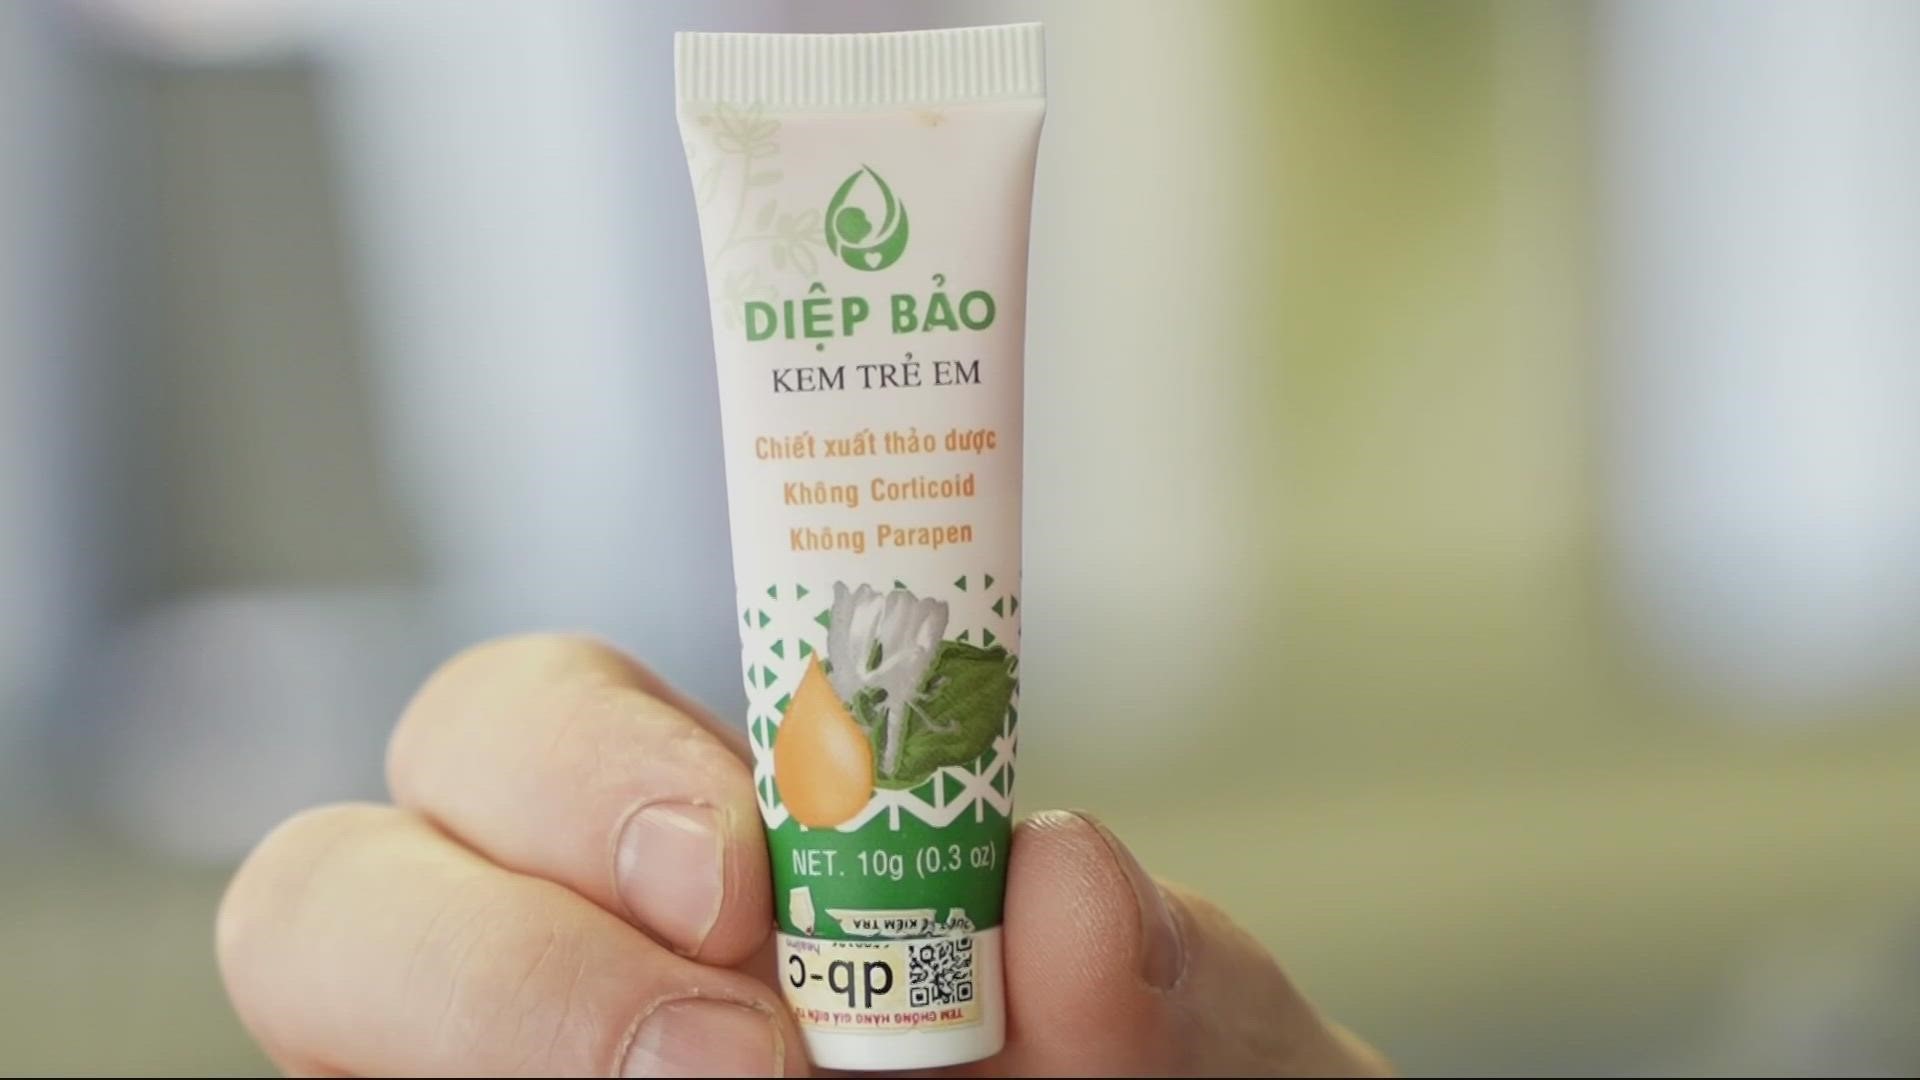 “Diep Bao” contained dangerously high levels of lead, the agency found. Several Portland-area parents had used the cream on their young children.